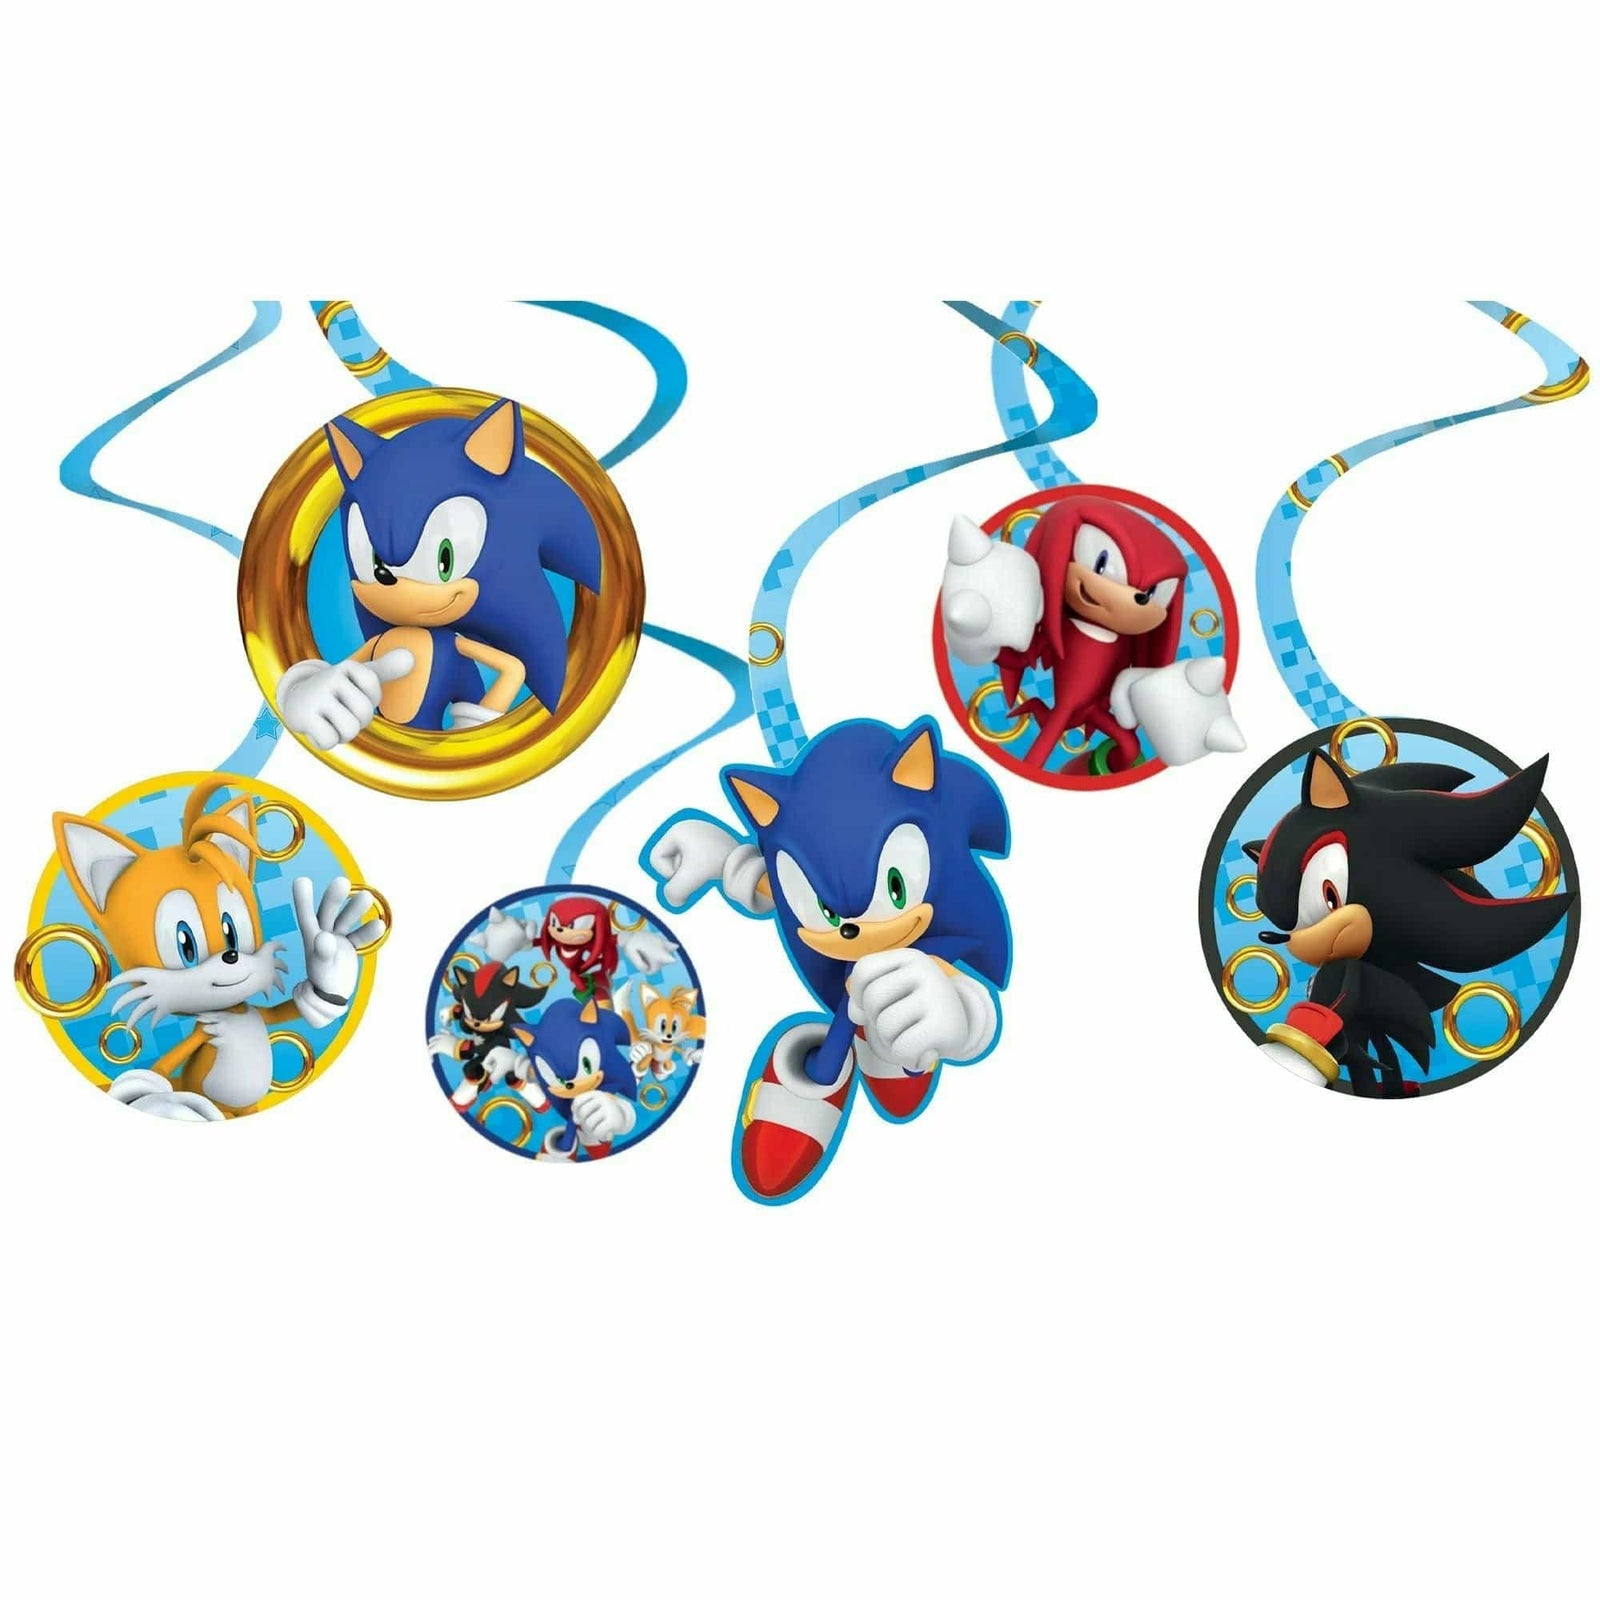 186pcs Sonic Birthday Party Supplies, Sonic Party Decorations, Includes  Sonic Theme Banner,Tablecloth,Plates,Napkins,Knives,Forks,Spoons,Cake